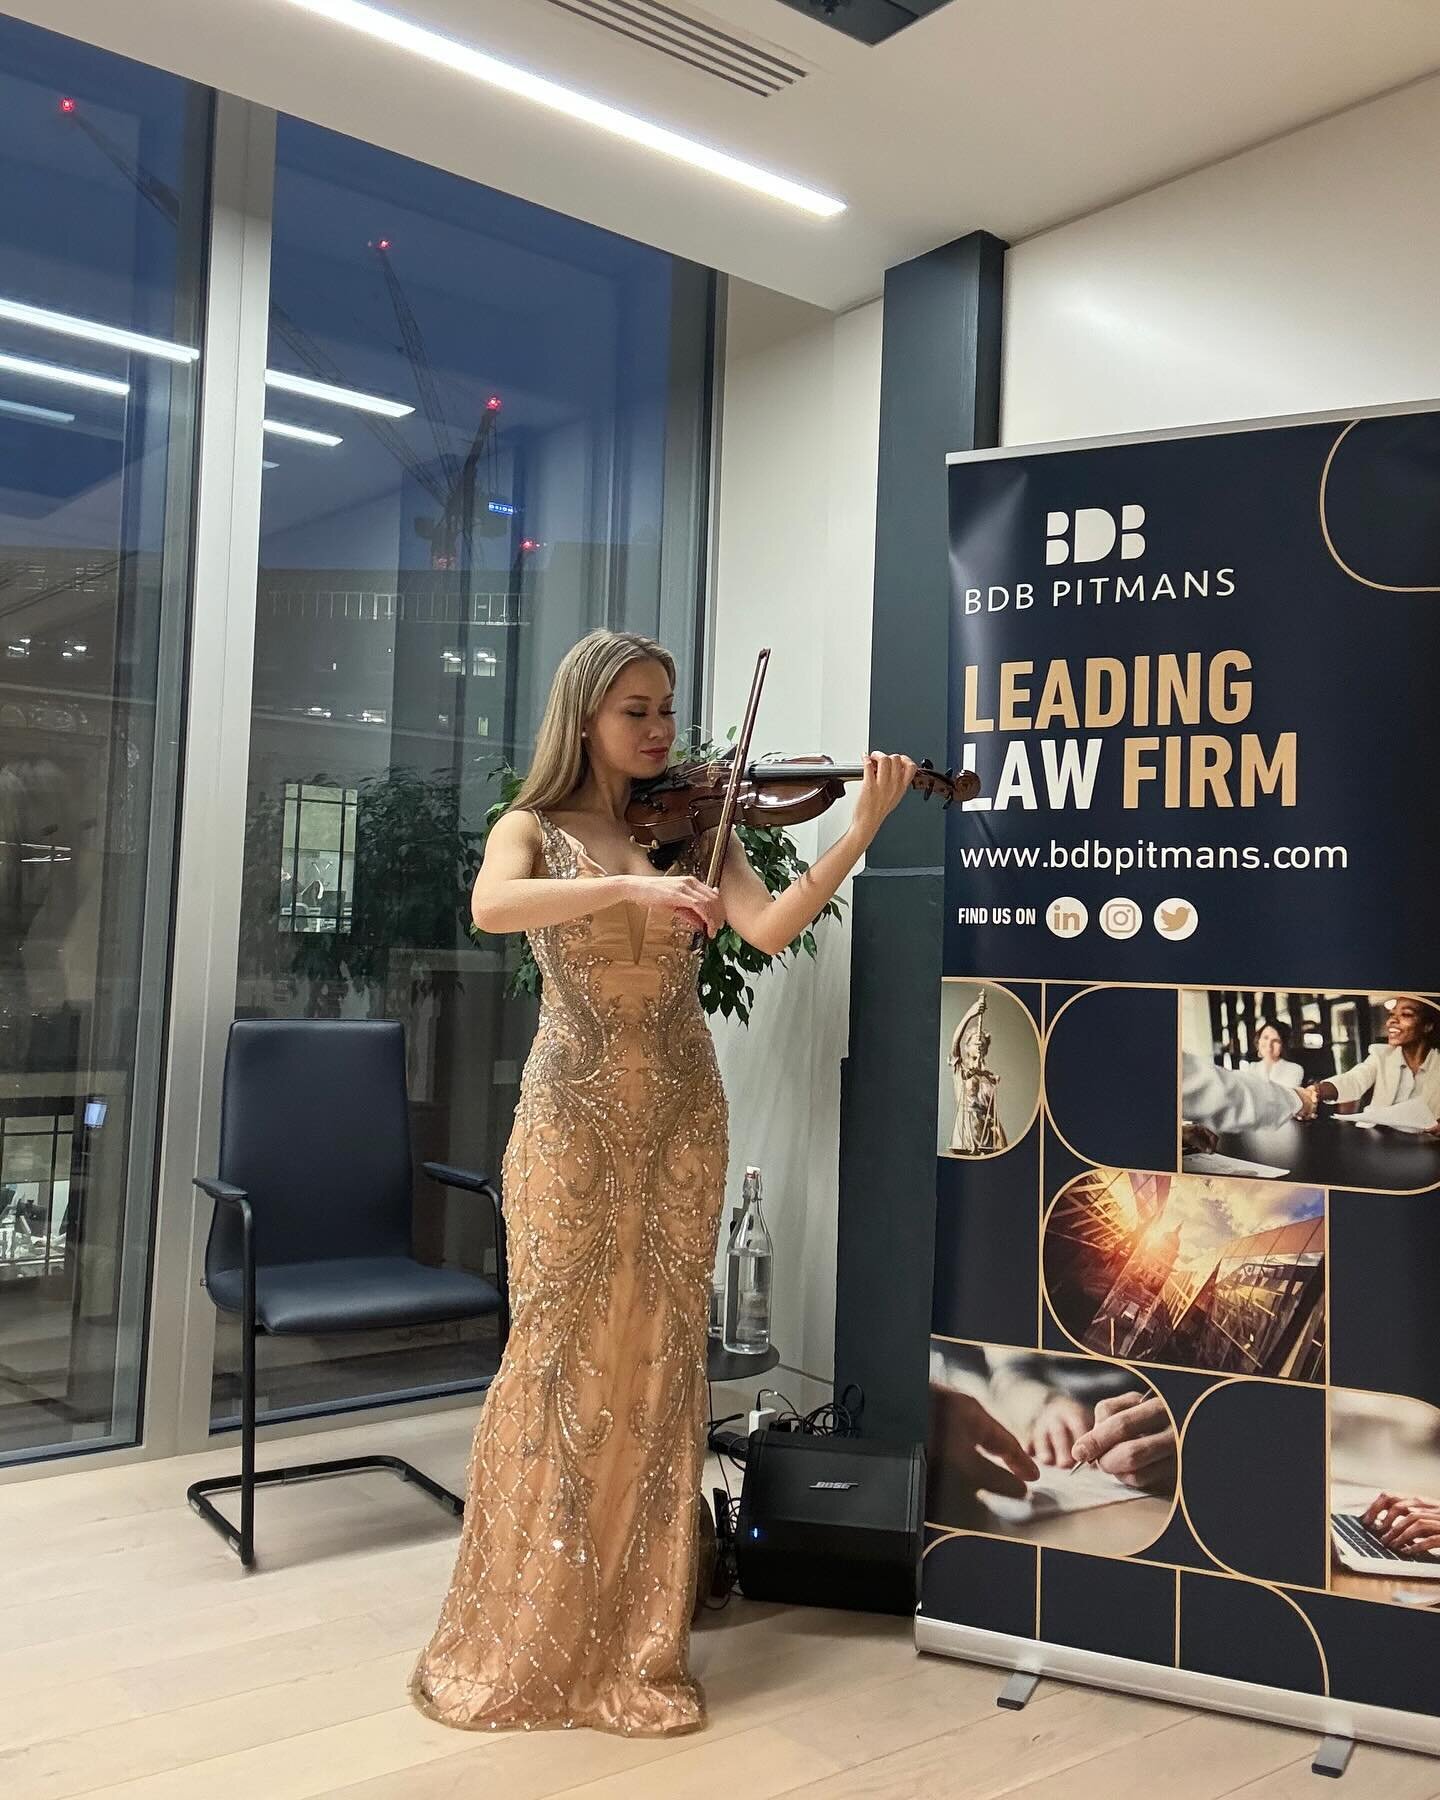 Our solo violinist performed during a drinks reception for BDB Pitmans . 
Thank you for having us. 

#corporateevents #lawfirm #violinist #violin #popcover #bridgerton #luxuryevents #drinksreception